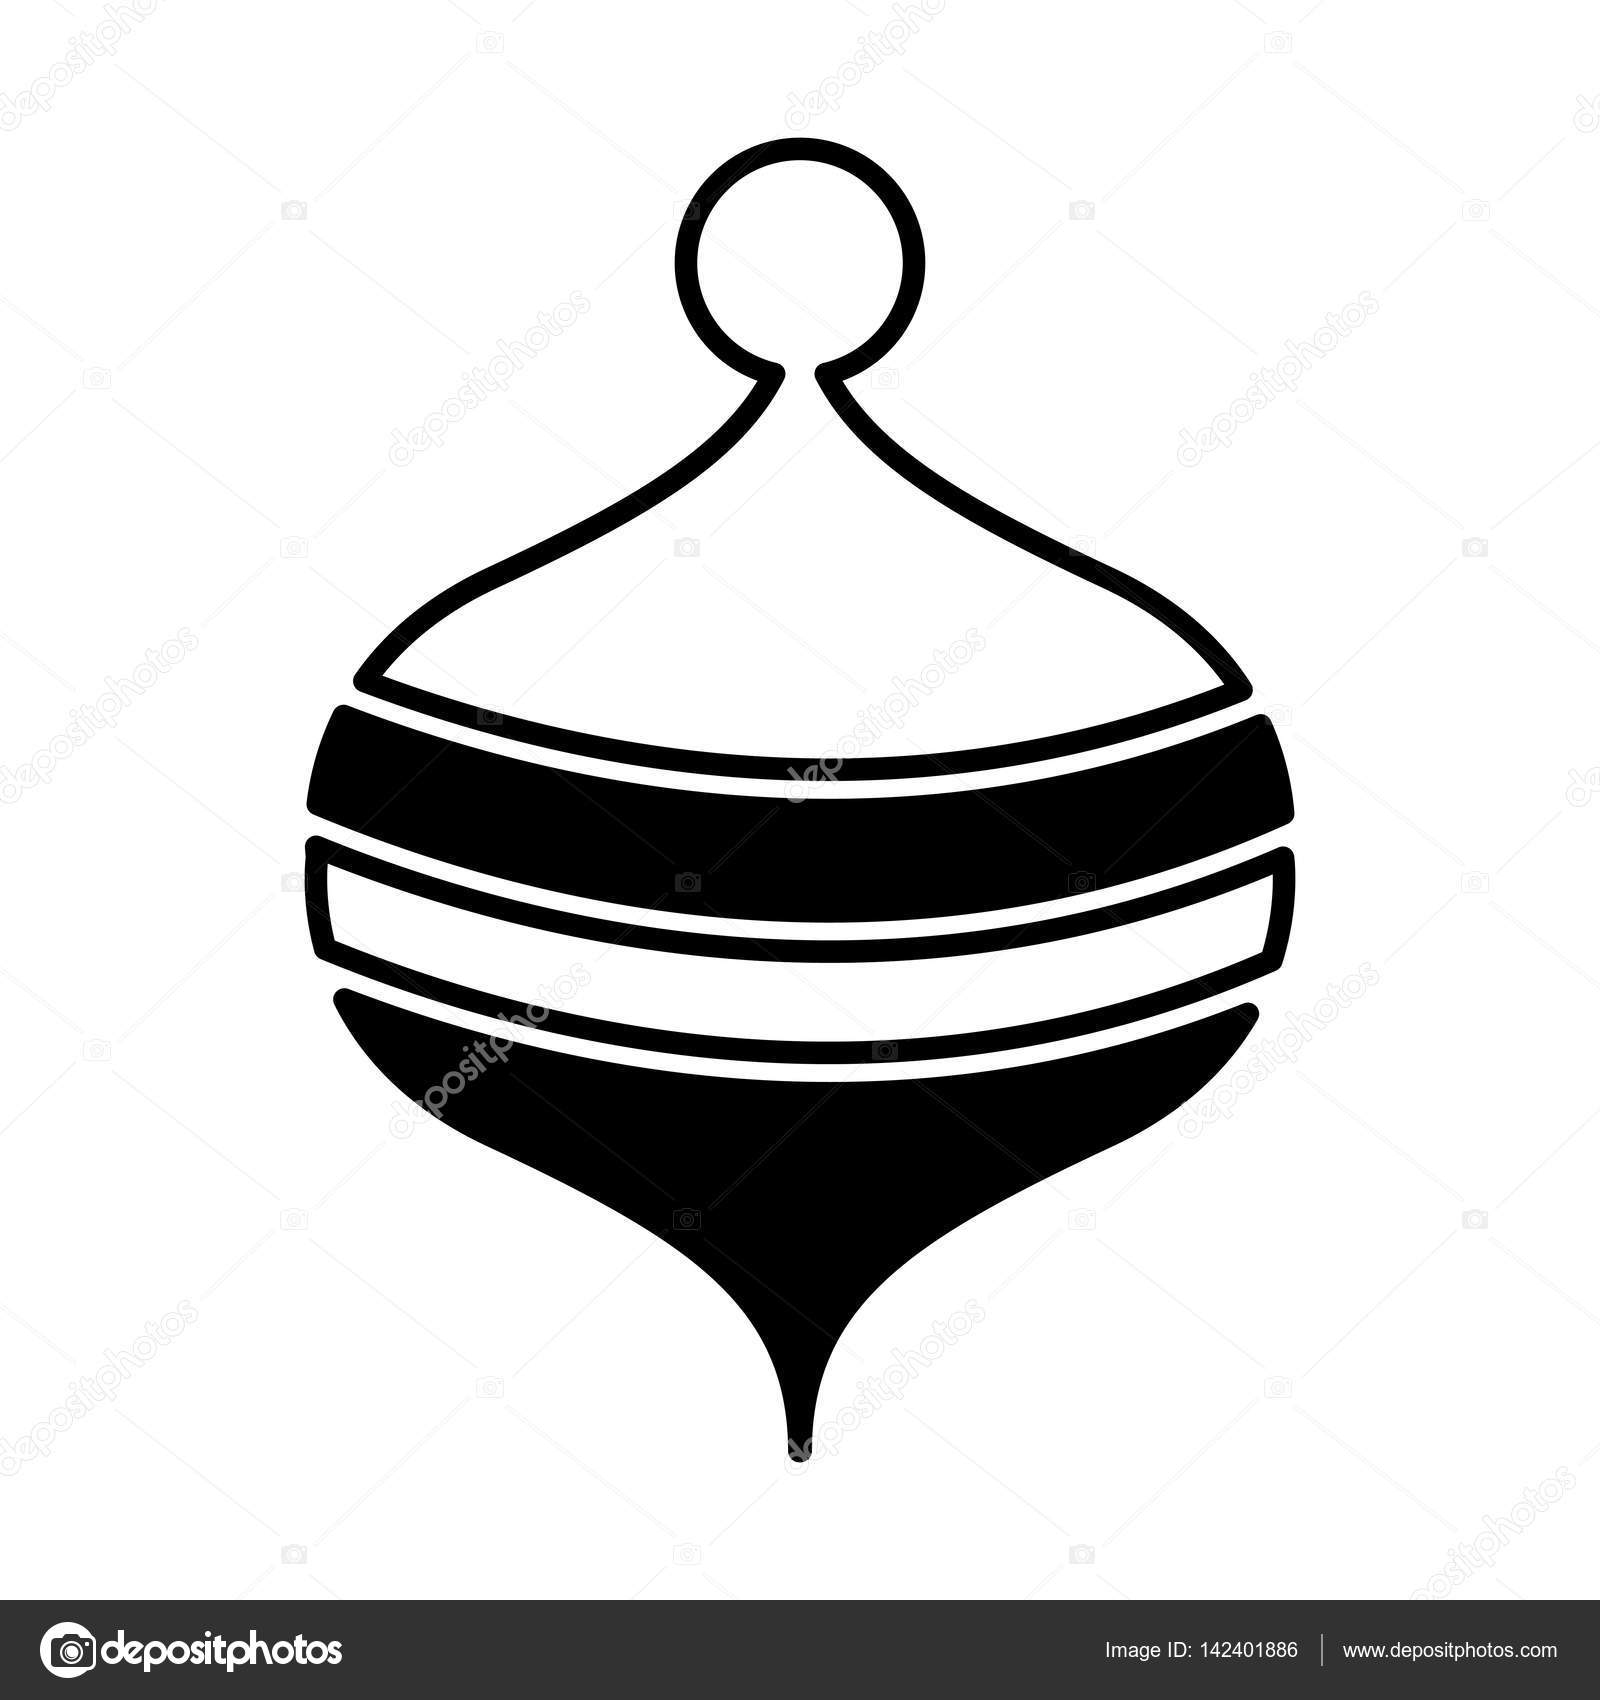 Toy Spinning Top Icon Vector Image By C Yupiramos Vector Stock 142401886